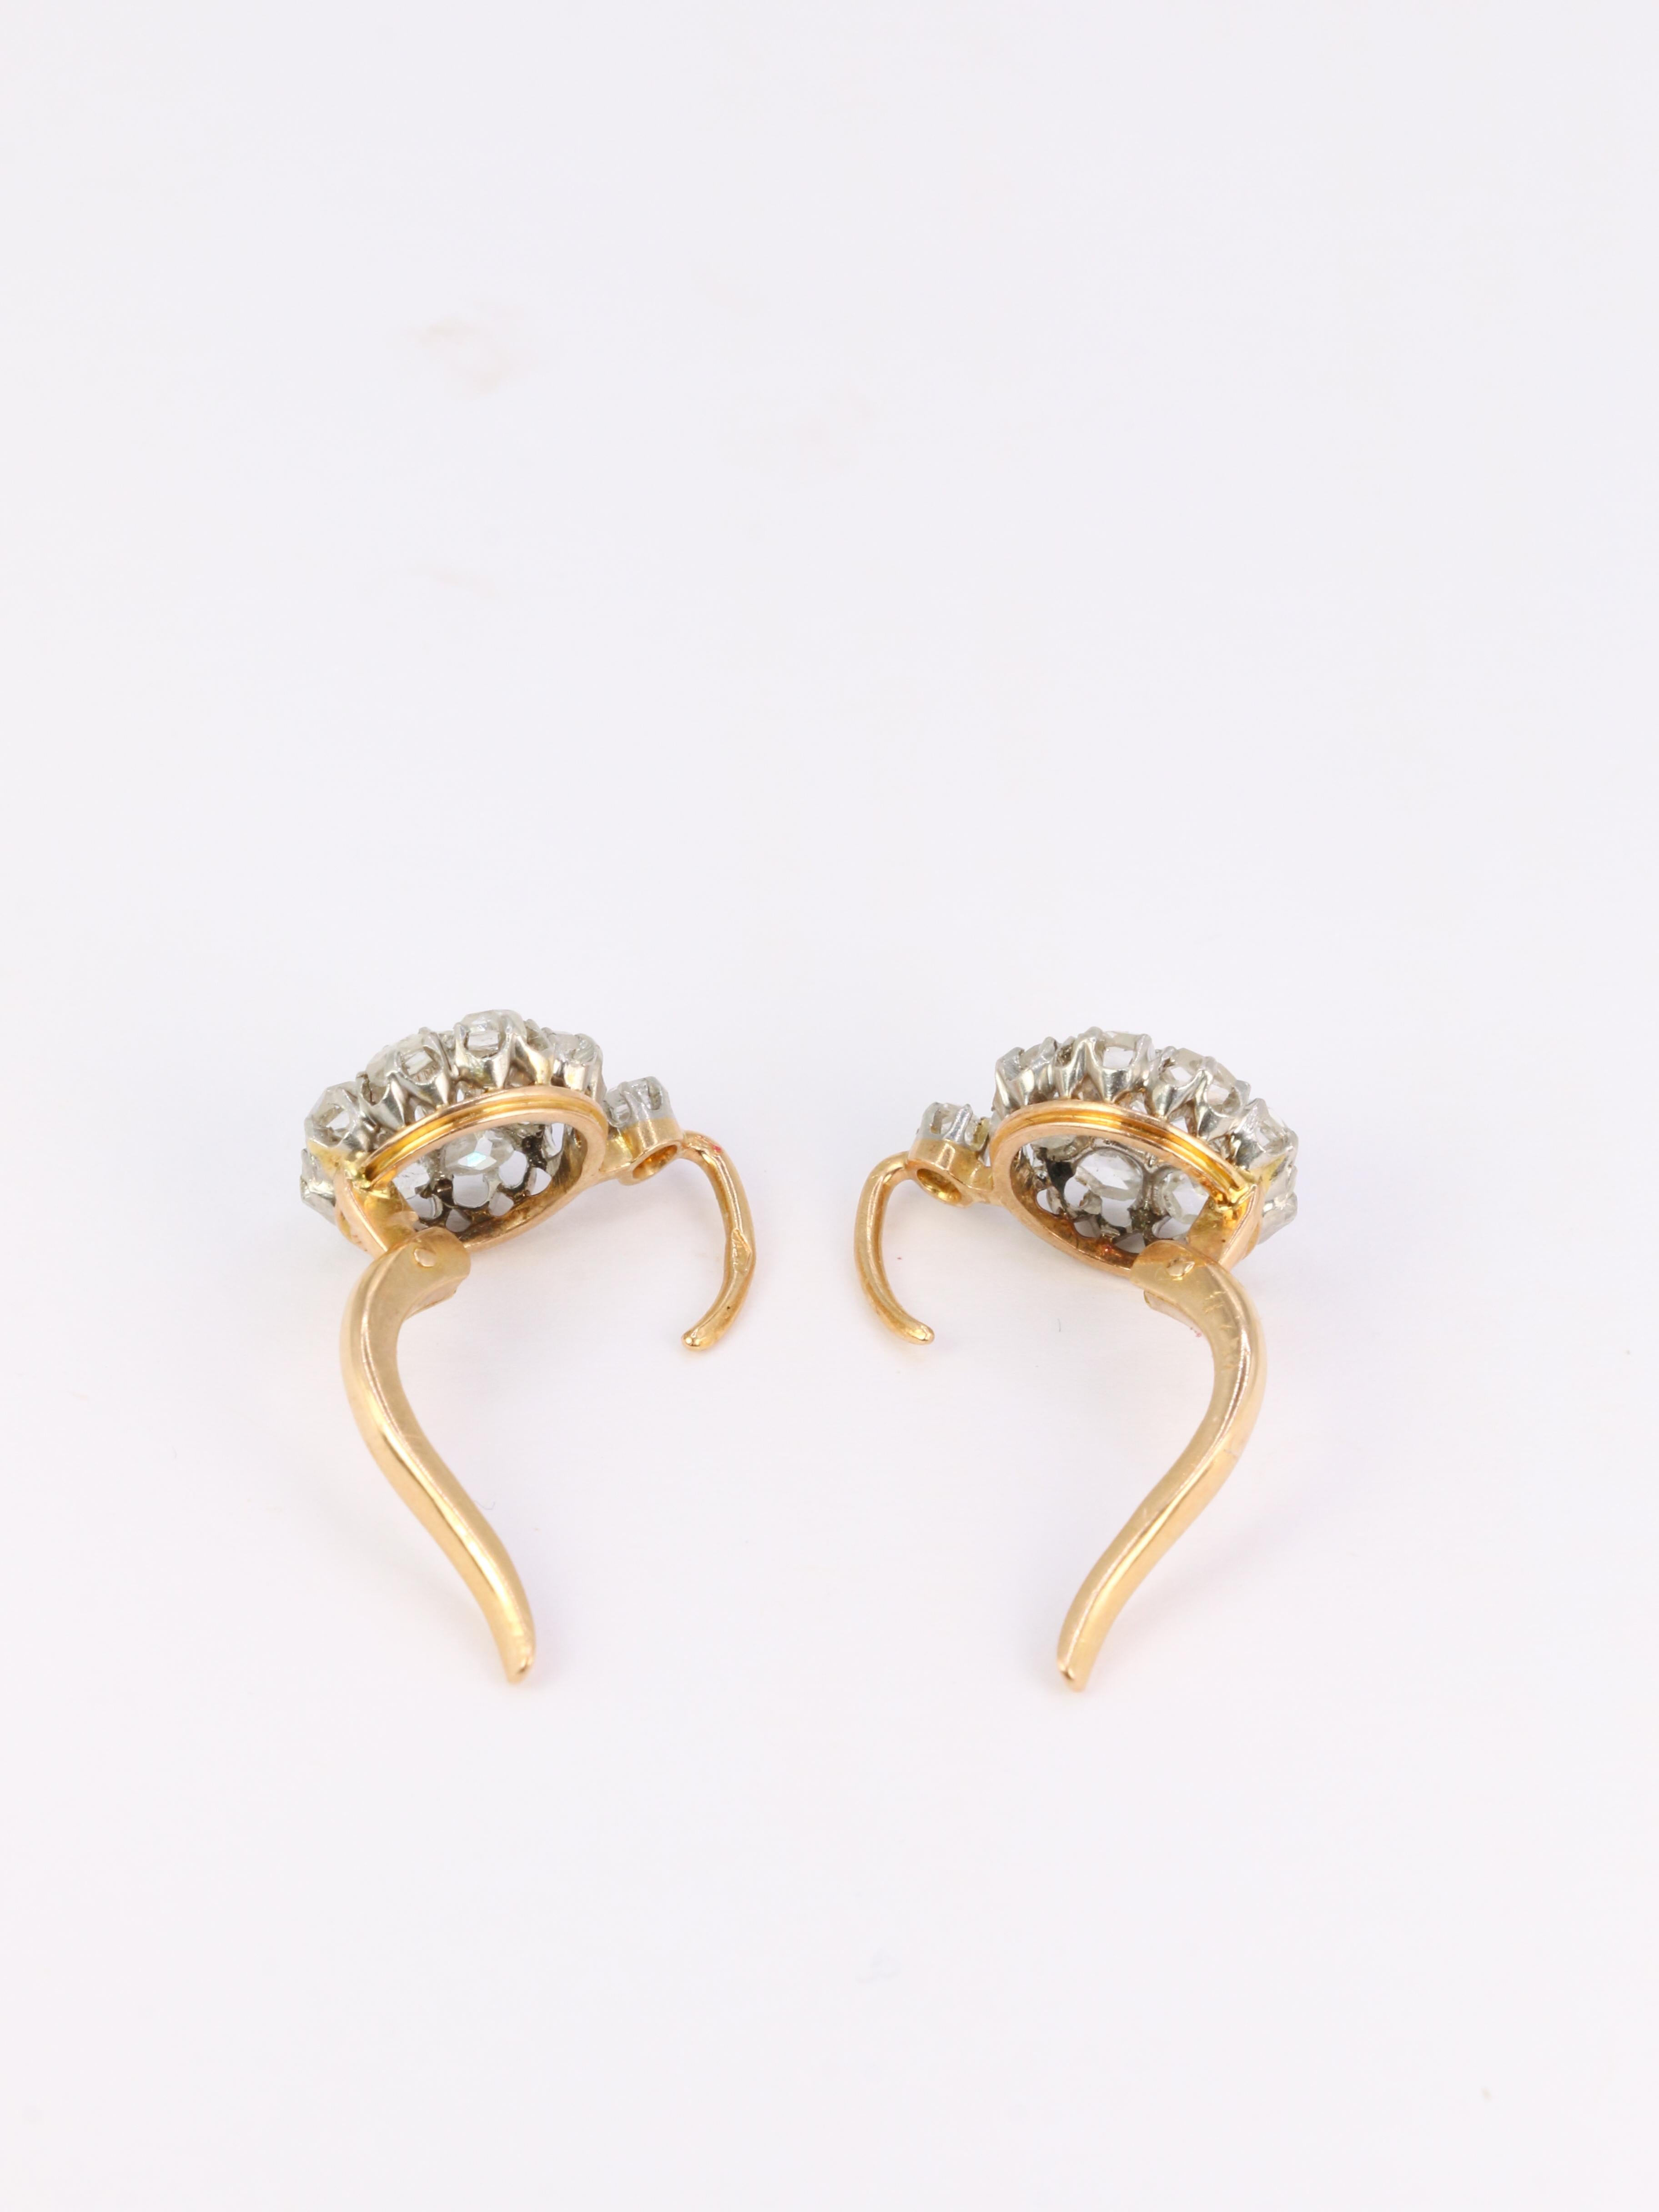 Antique gold and silver earrings set with old mine cut diamonds 2